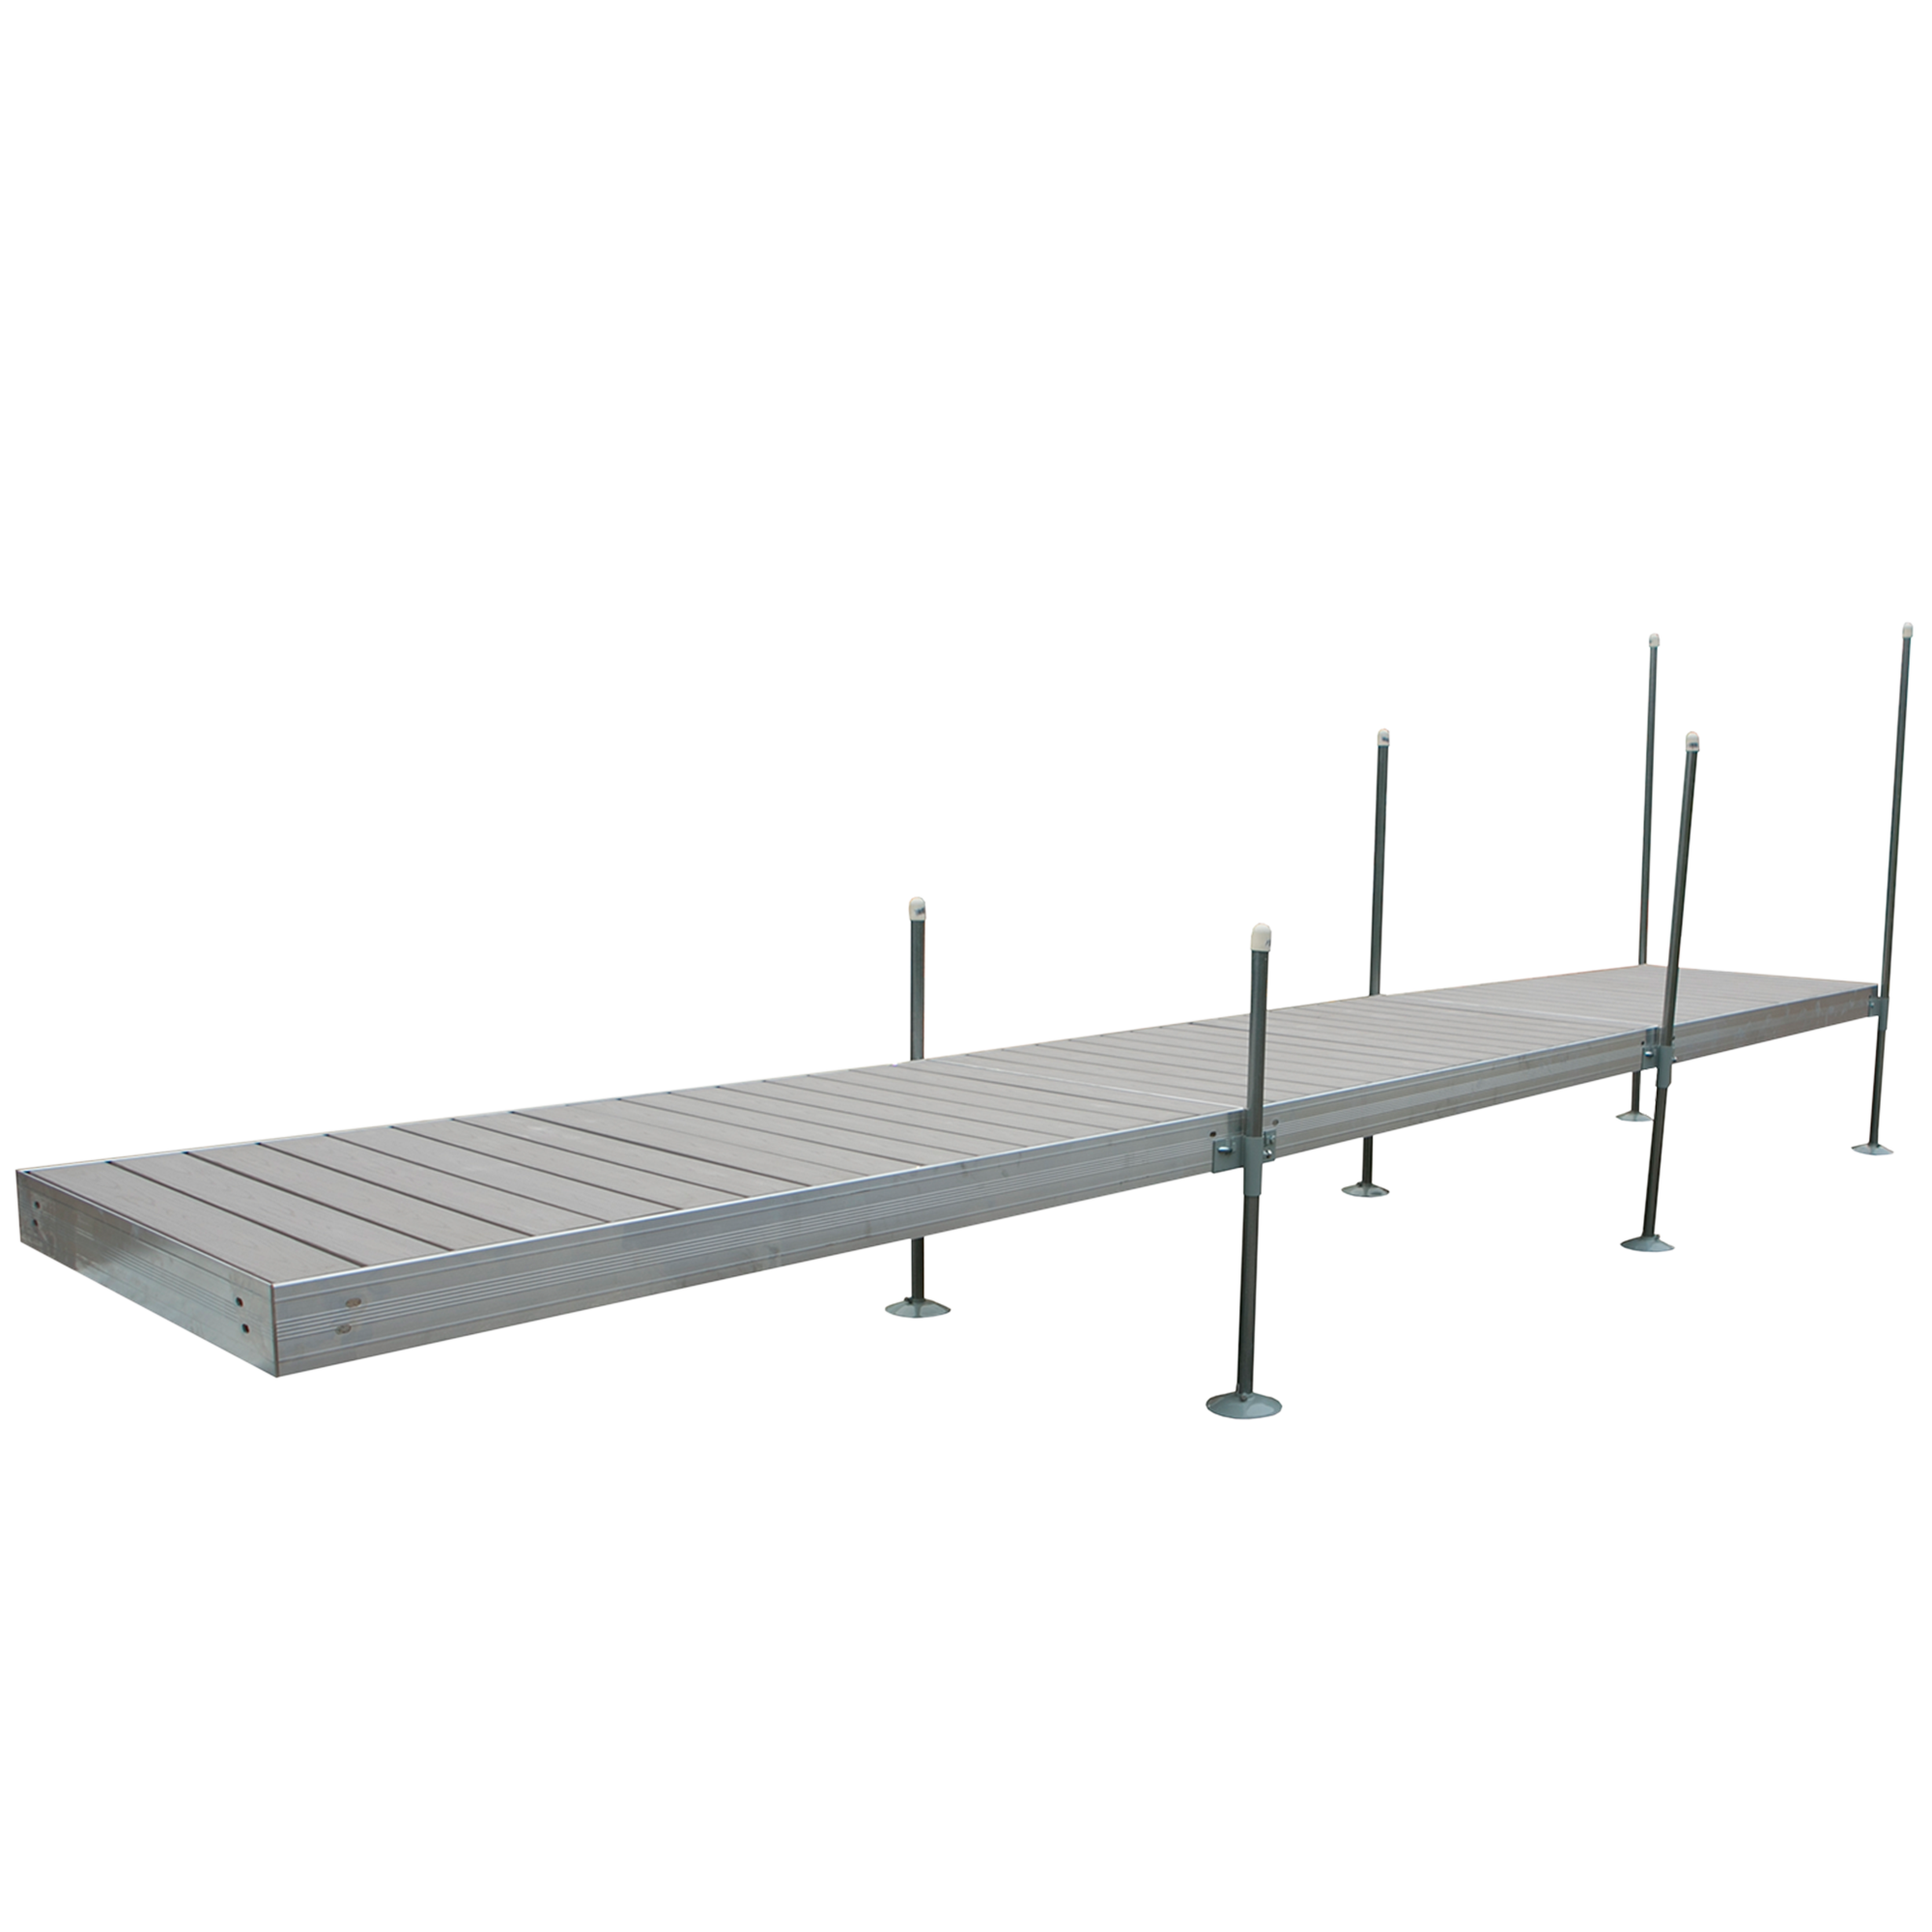 24' Straight Boat Dock System with Aluminum Frame and Gray Composite Decking